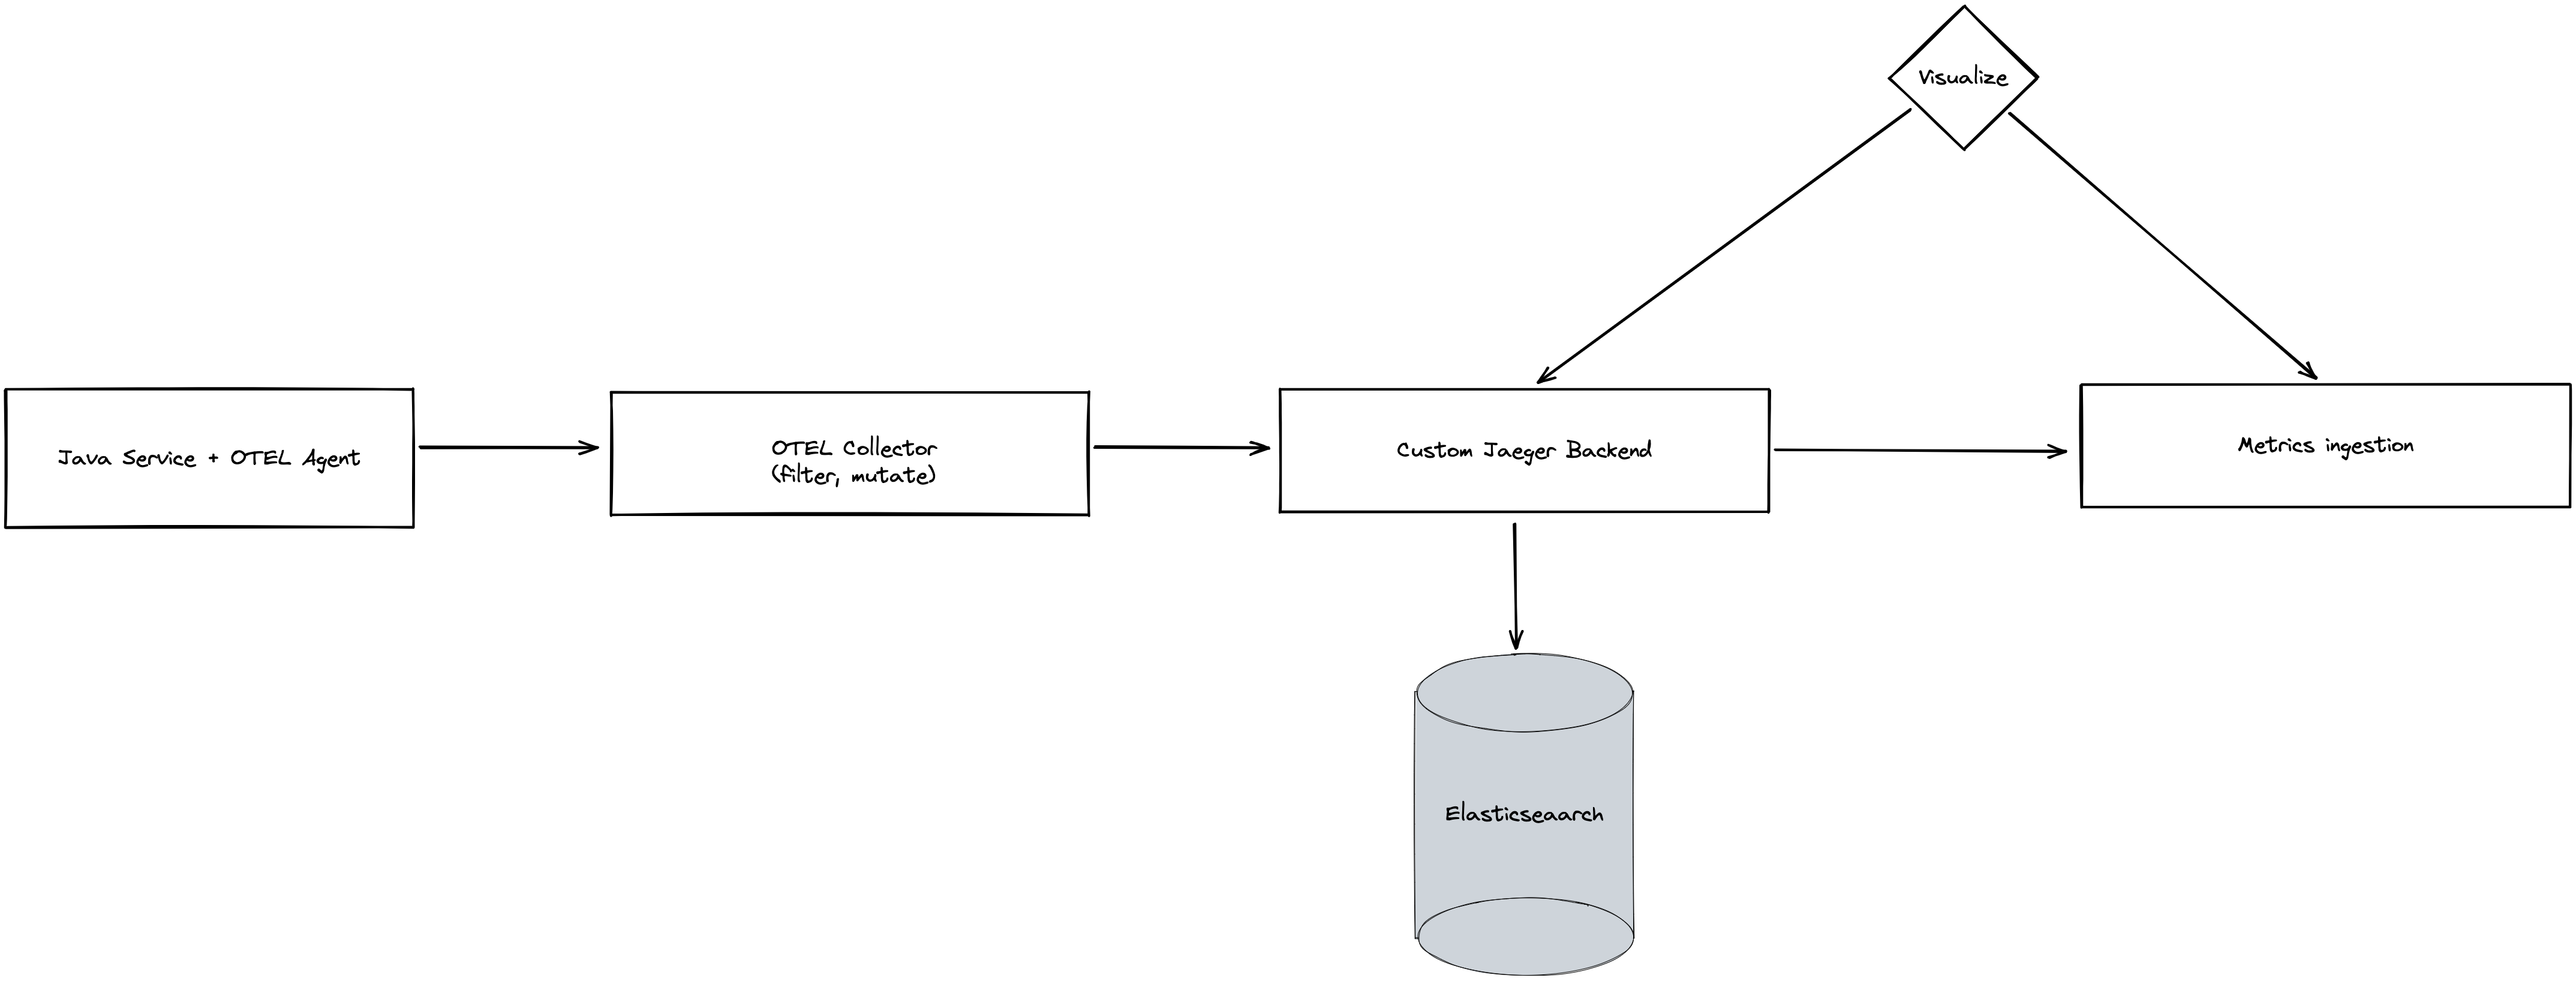 a diagram showing visualization at the top with arrows that flow down to a process that shows a Jaeger workflow from Java service to OTEL collector to a custom Jaeger backend and metrics. The Jaeger backend is shown flowing to Elasticsearch at the bottom of the diagram.